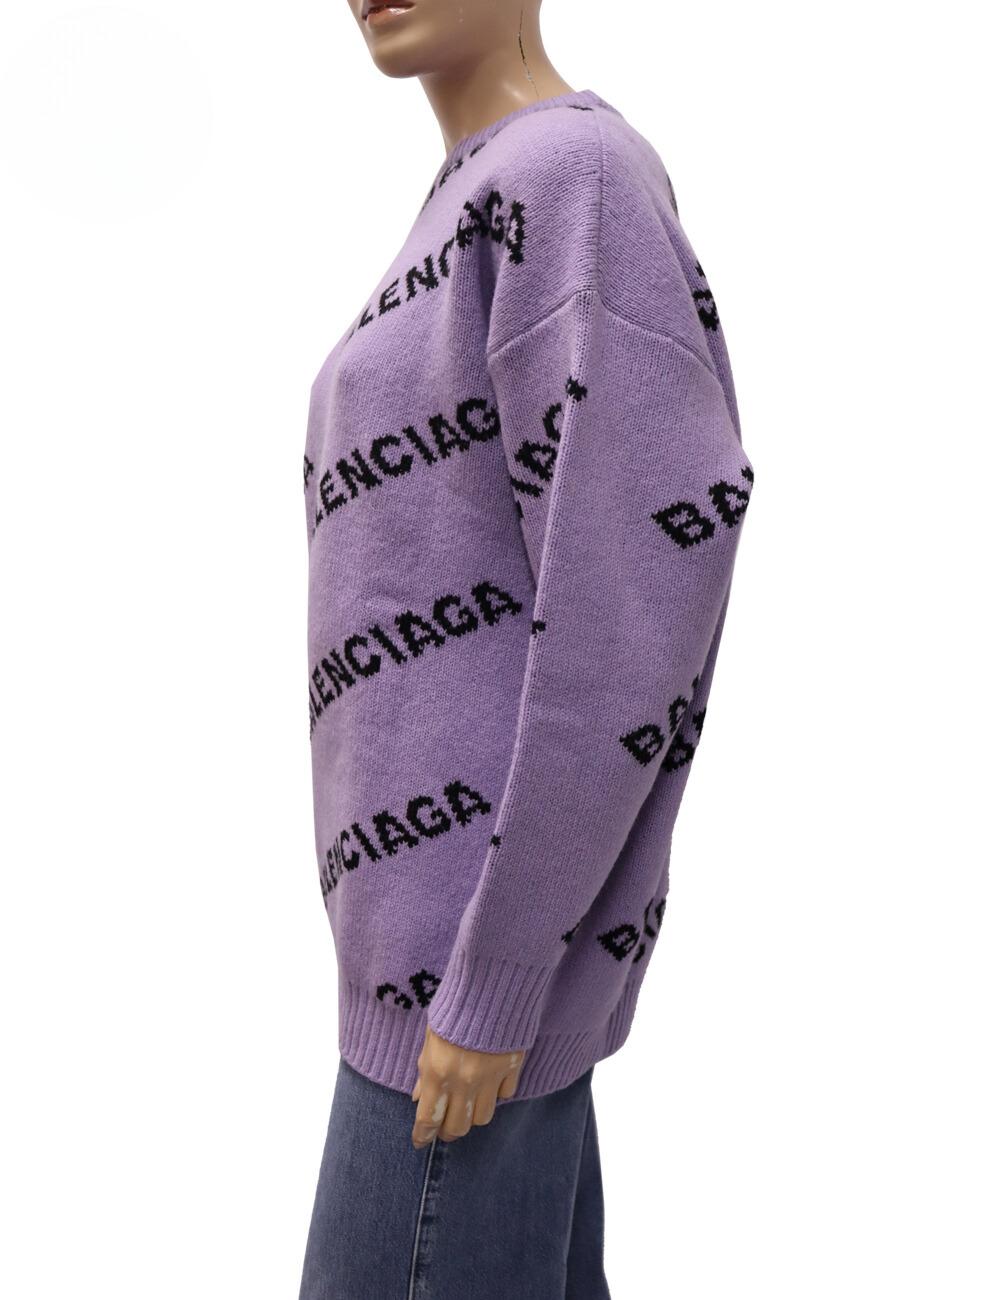 Balenciaga Printed All Over Logo Sweater Size Small In Good Condition For Sale In Amman, JO